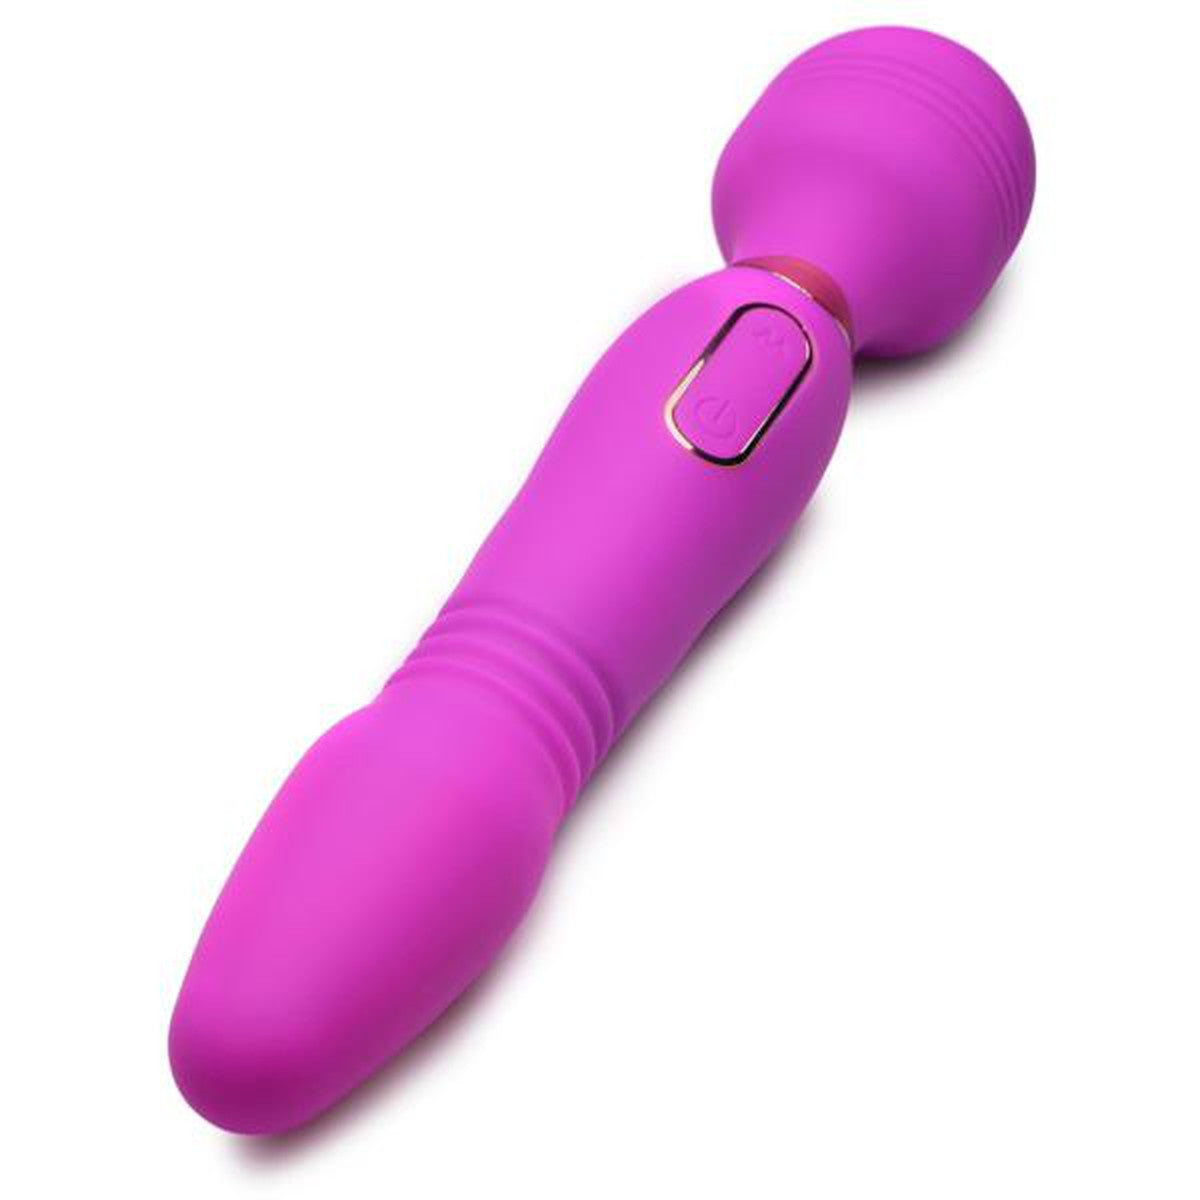 Ultra Thrust-her Deluxe Thrusting Vibrating Silicone Wand